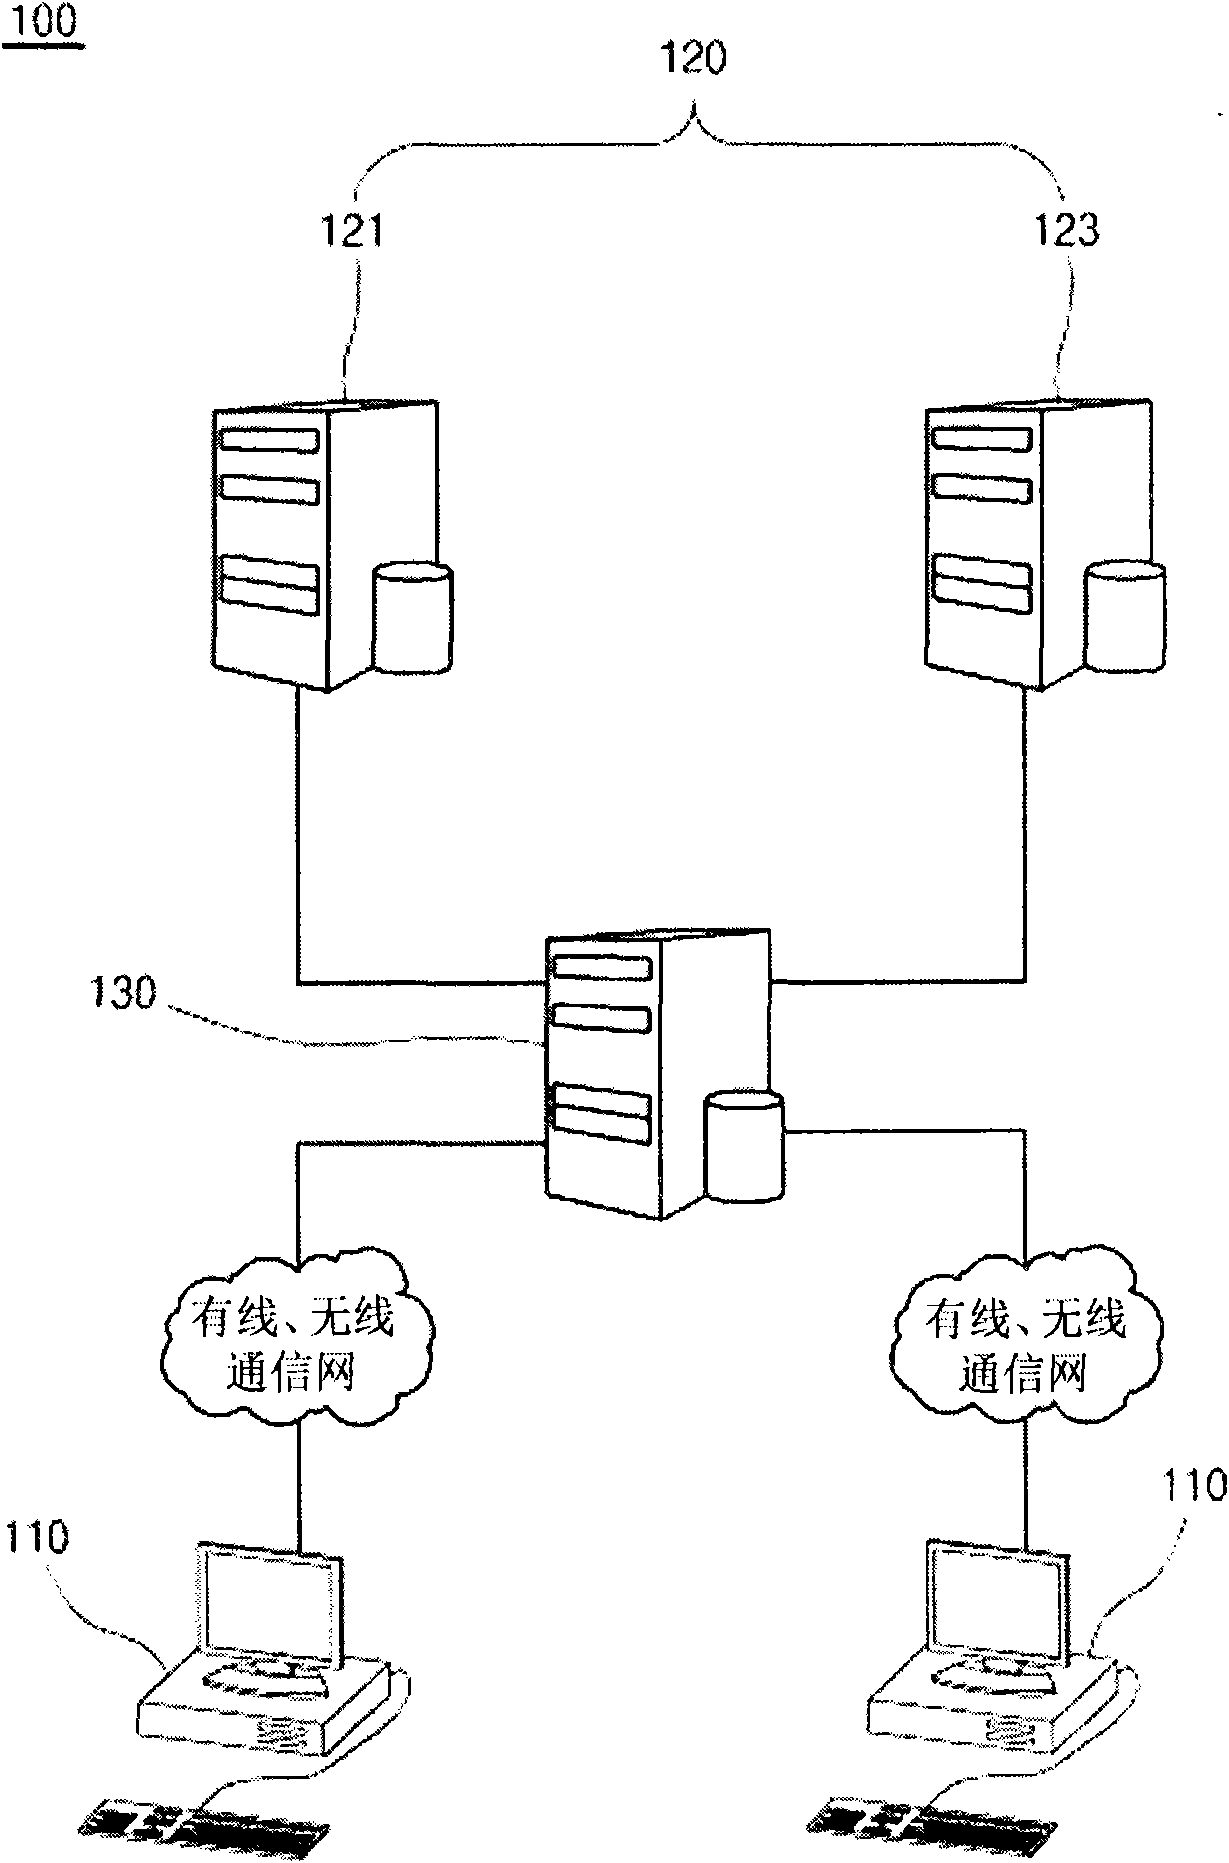 Method for scoring individual network competitiveness and network effect in an online social network